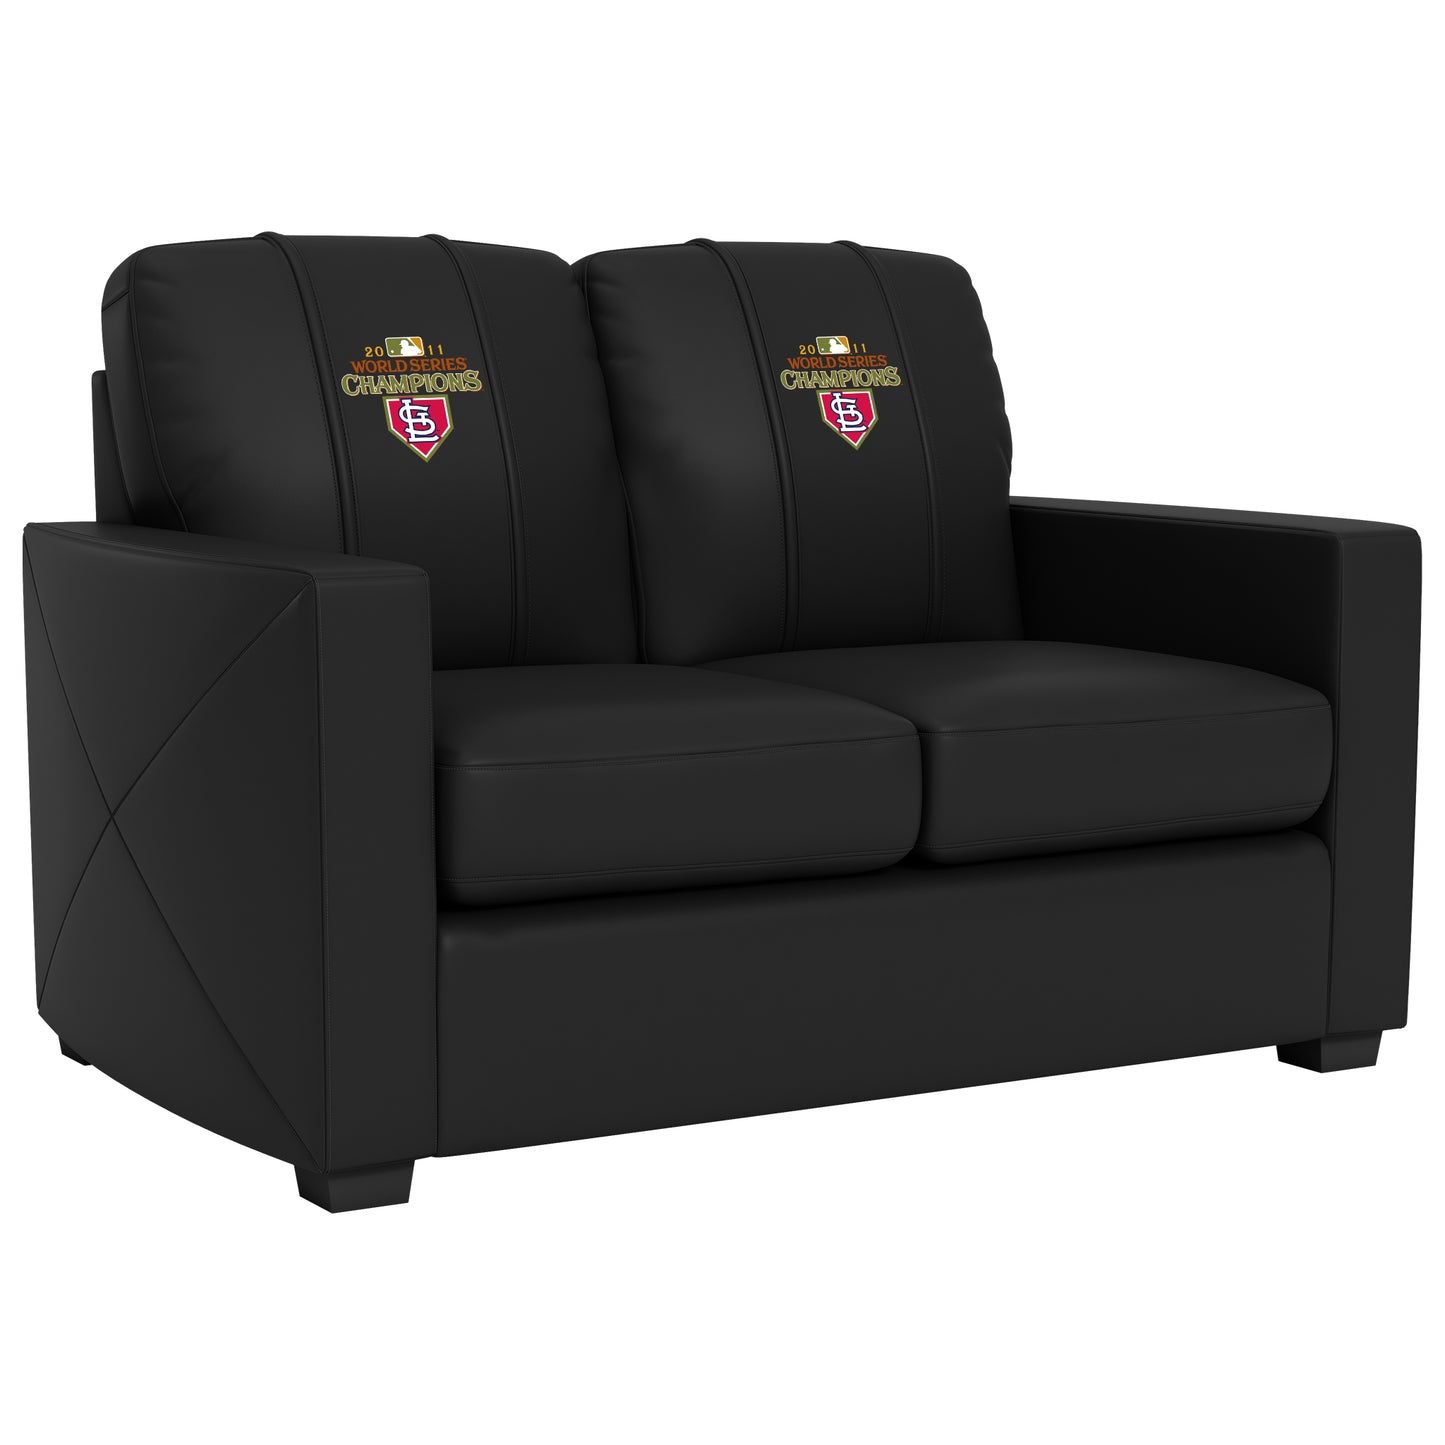 Silver Loveseat with St Louis Cardinals Champs 2011